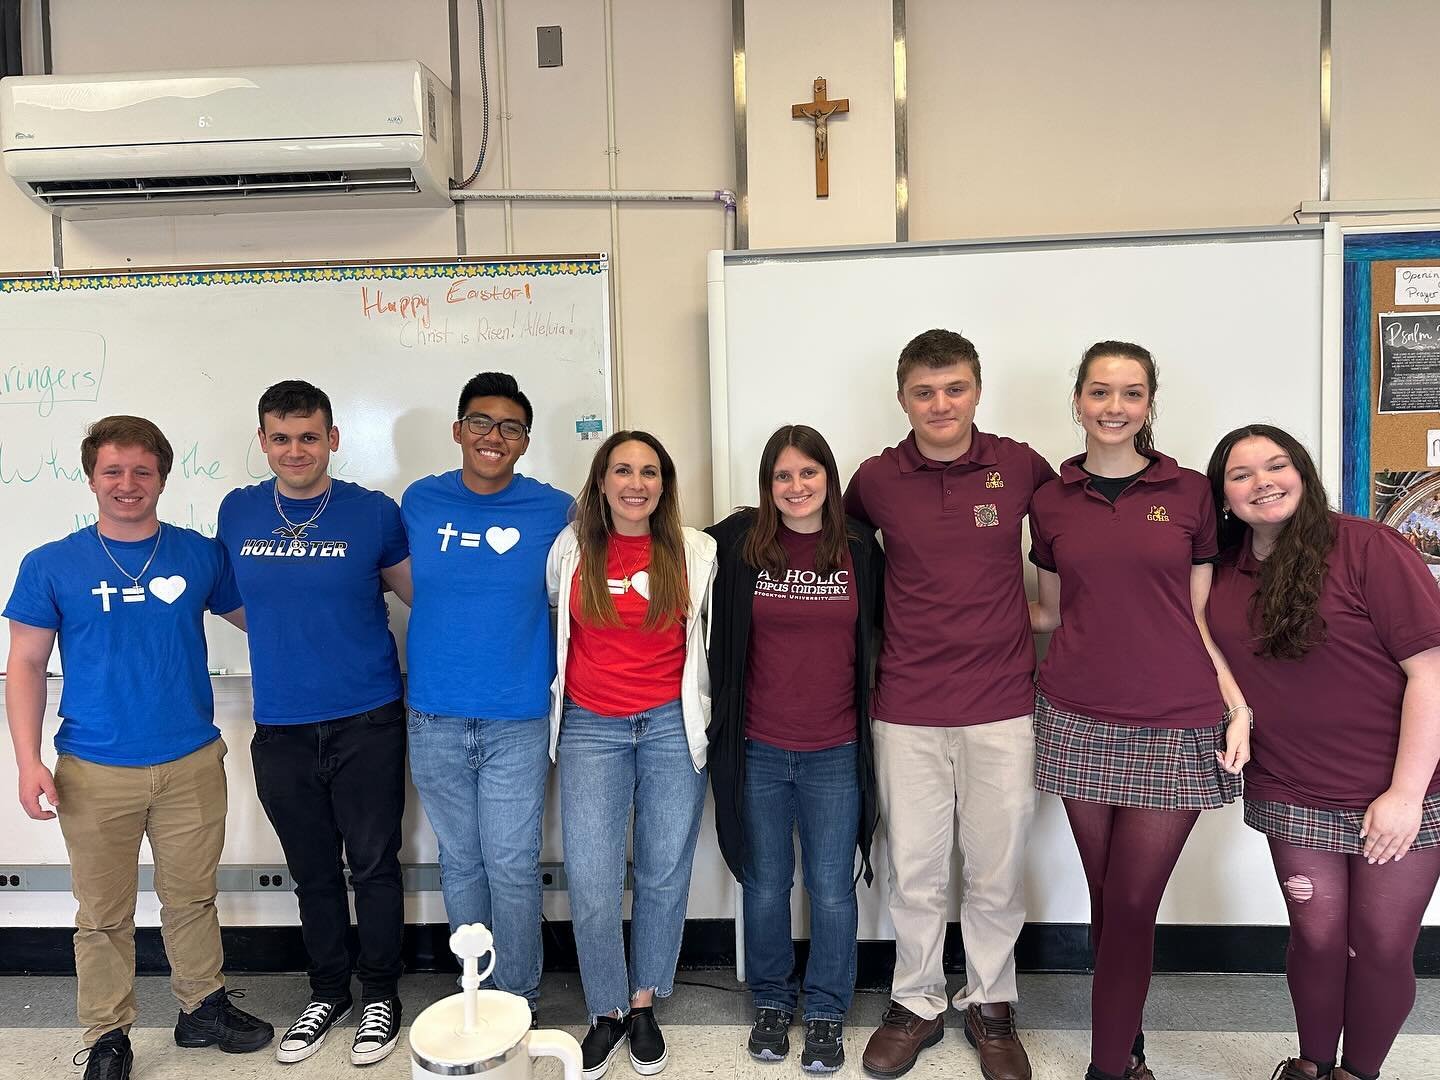 Today we spoke at Gloucester Catholic HS @gchsrams to the junior &amp; senior classes. We shared about Rowan Catholic Campus Ministry &amp; @stocktonnewmanclub and keeping your faith alive in college. Thank you to Fr. Gallagher, Mrs. Silber and Ms. C